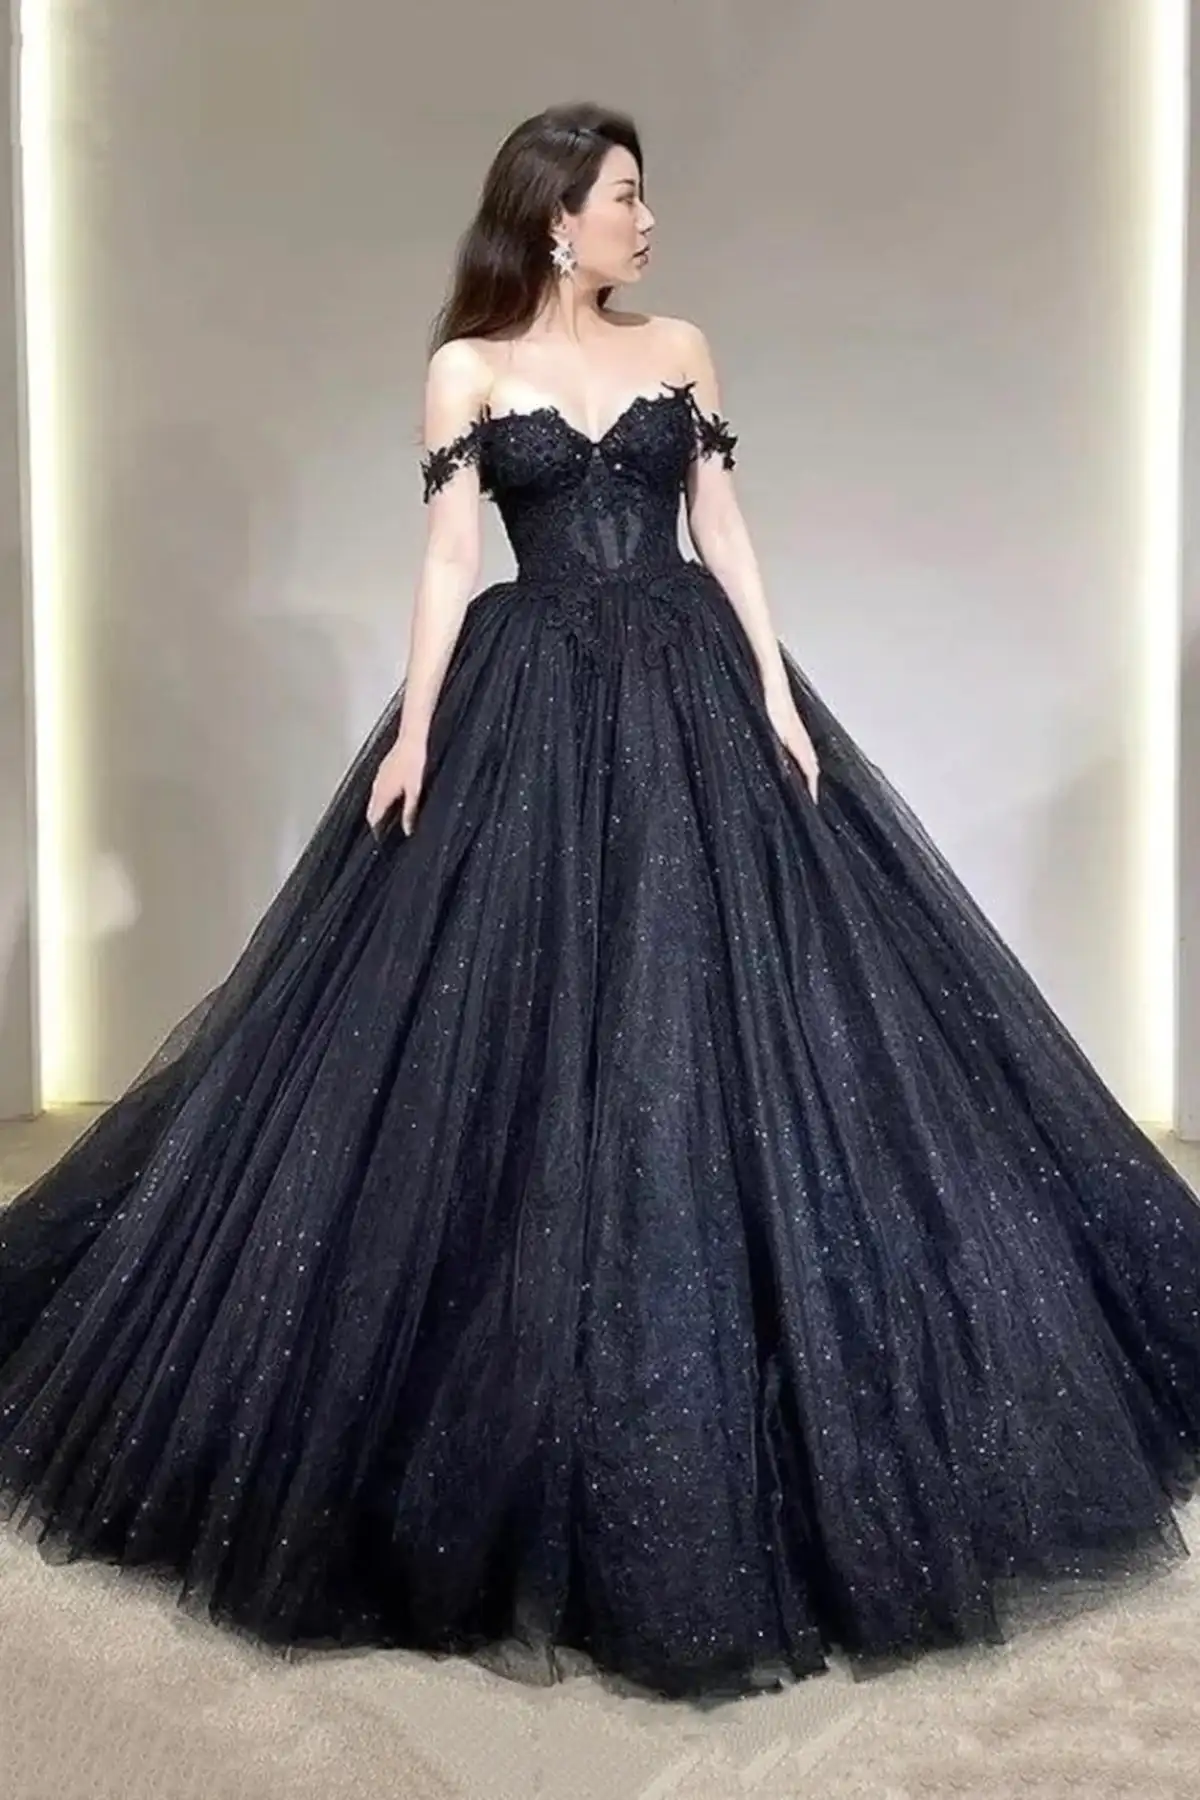 

Black Evening Dresses Sparkly Tulle Bling Ball Gown Lace Applique Off Shoulder Sweetheart Long V Neck Prom Gowns Formal Party